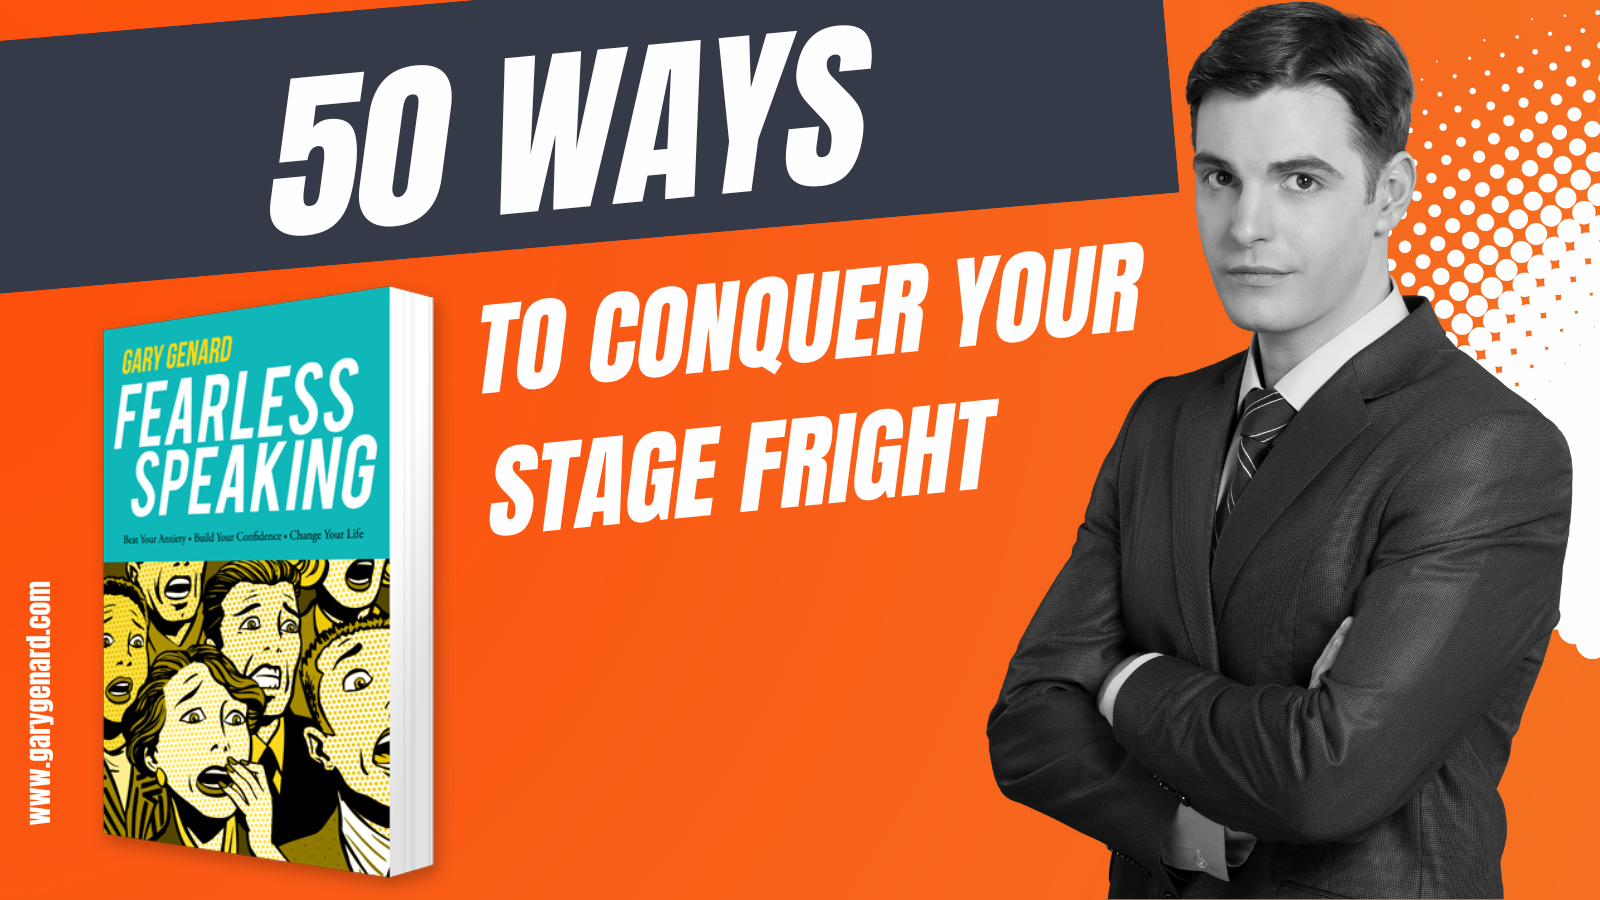 50 ways to conquer your stage fright